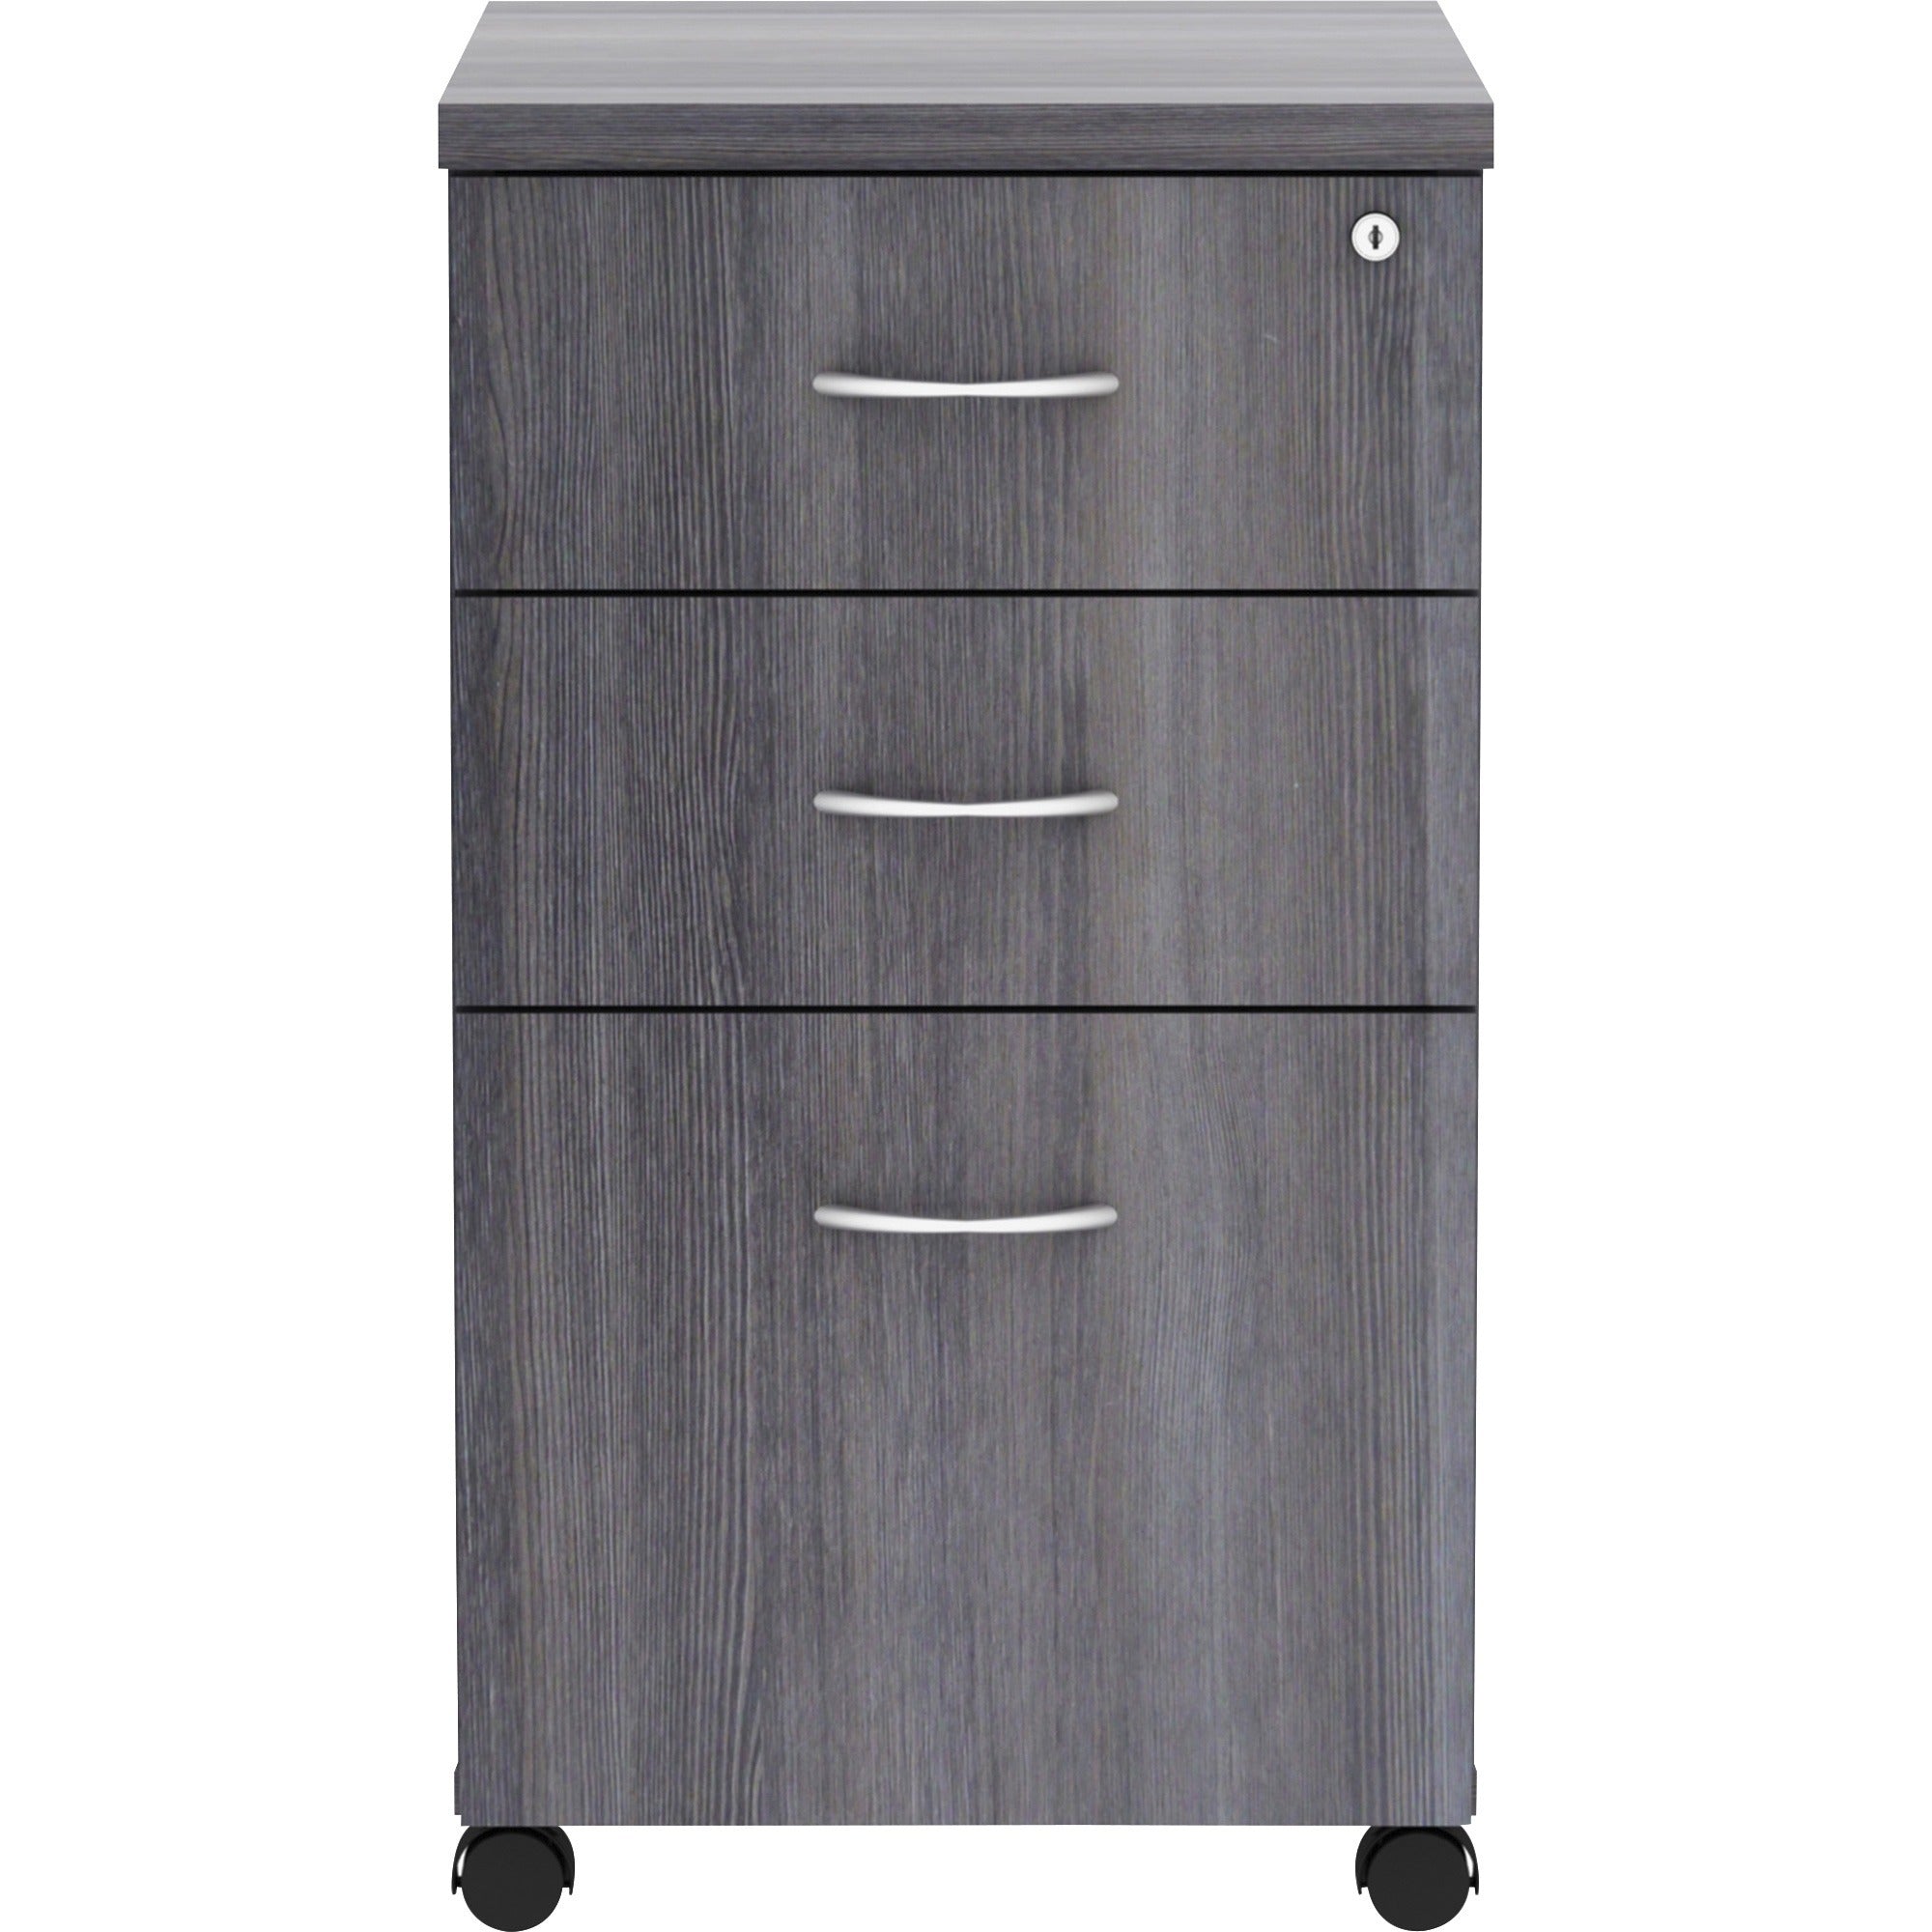 lorell-essentials-series-box-box-file-mobile-file-cabinet-16-x-22283-3-x-box-file-drawers-finish-weathered-charcoal-laminate_llr69560 - 2